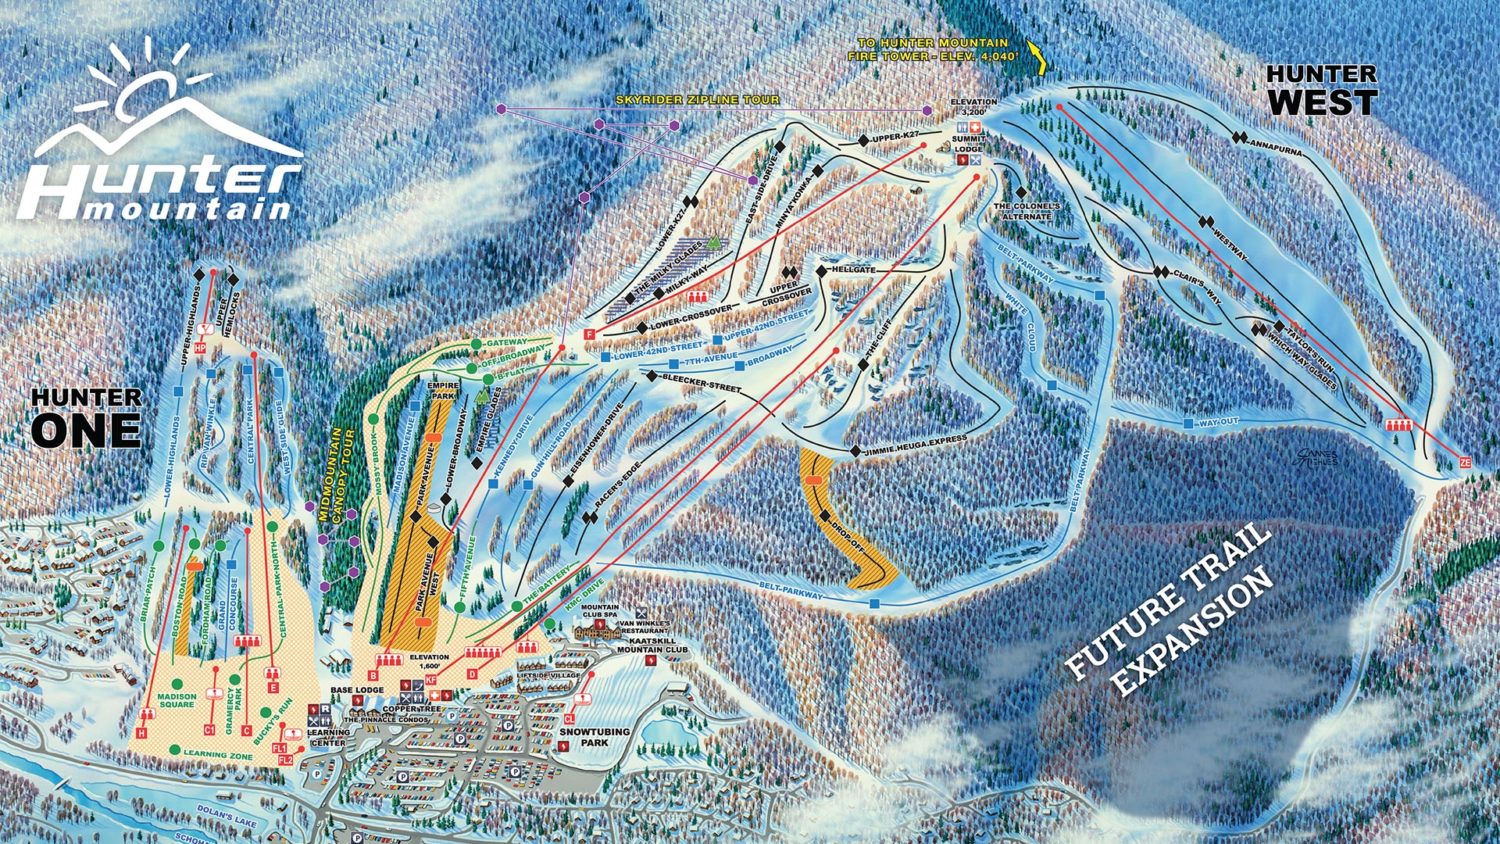 Hunter Mountain- Largest East Coast Ski Expansion in Over a Decade